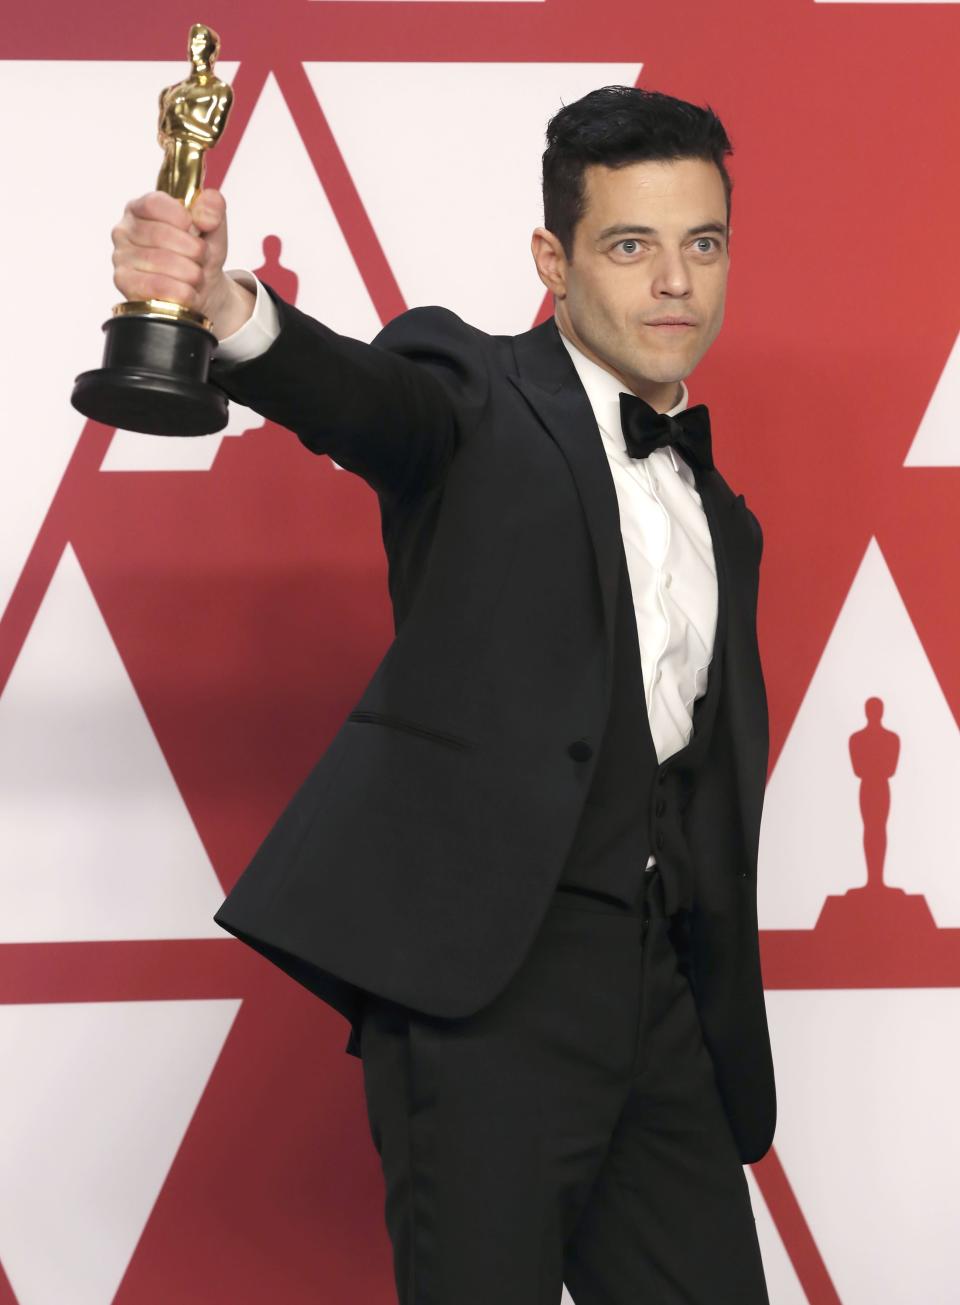 91st Academy Awards – Oscars Photo Room – Hollywood, Los Angeles, California, U.S., February 24, 2019. Best Actor Rami Malek poses with his award backstage, REUTERS/Mike Segar